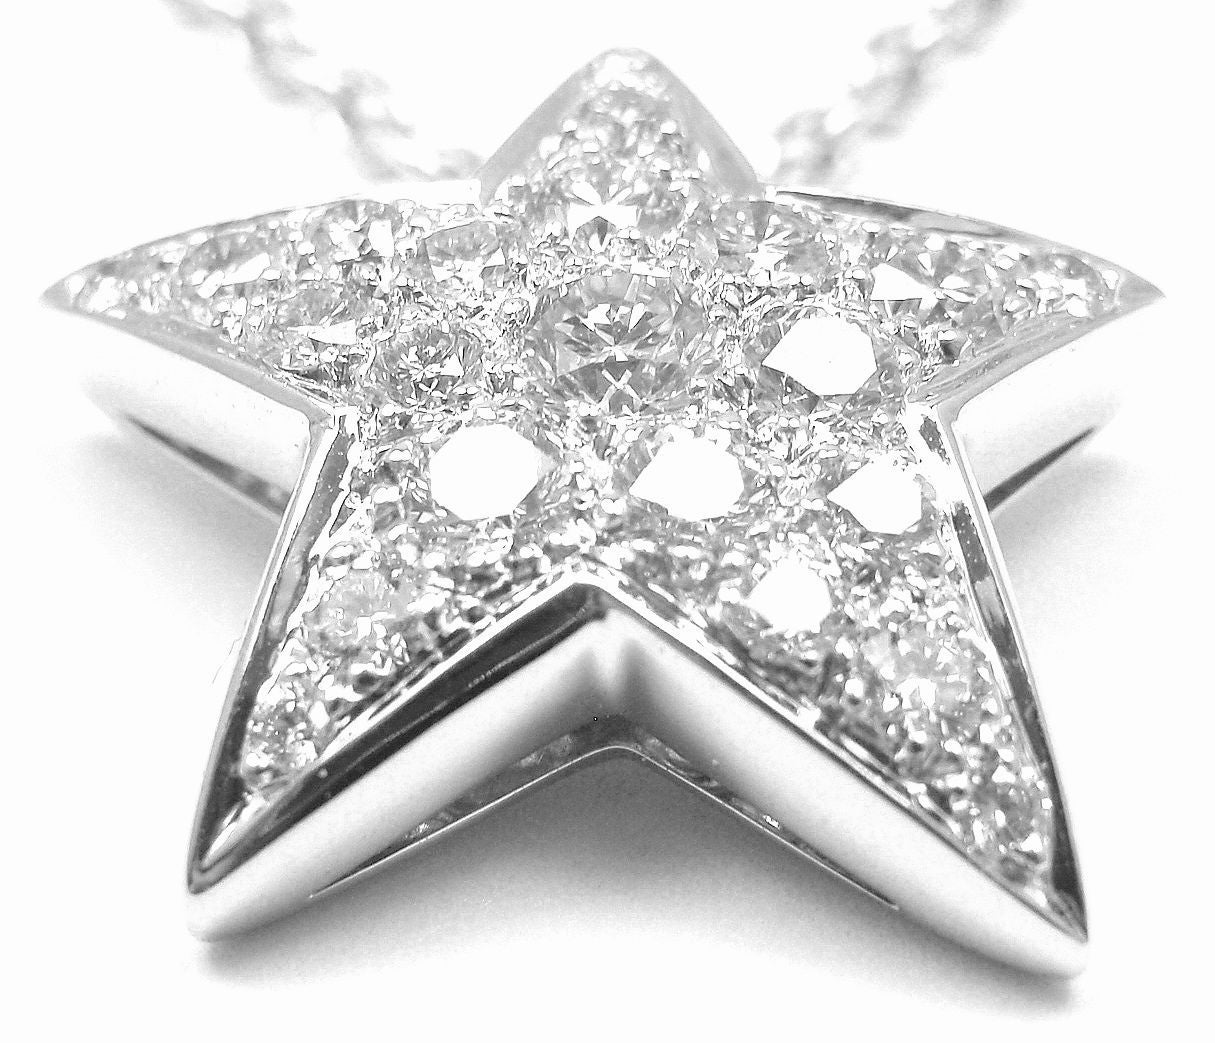 chanel star necklace